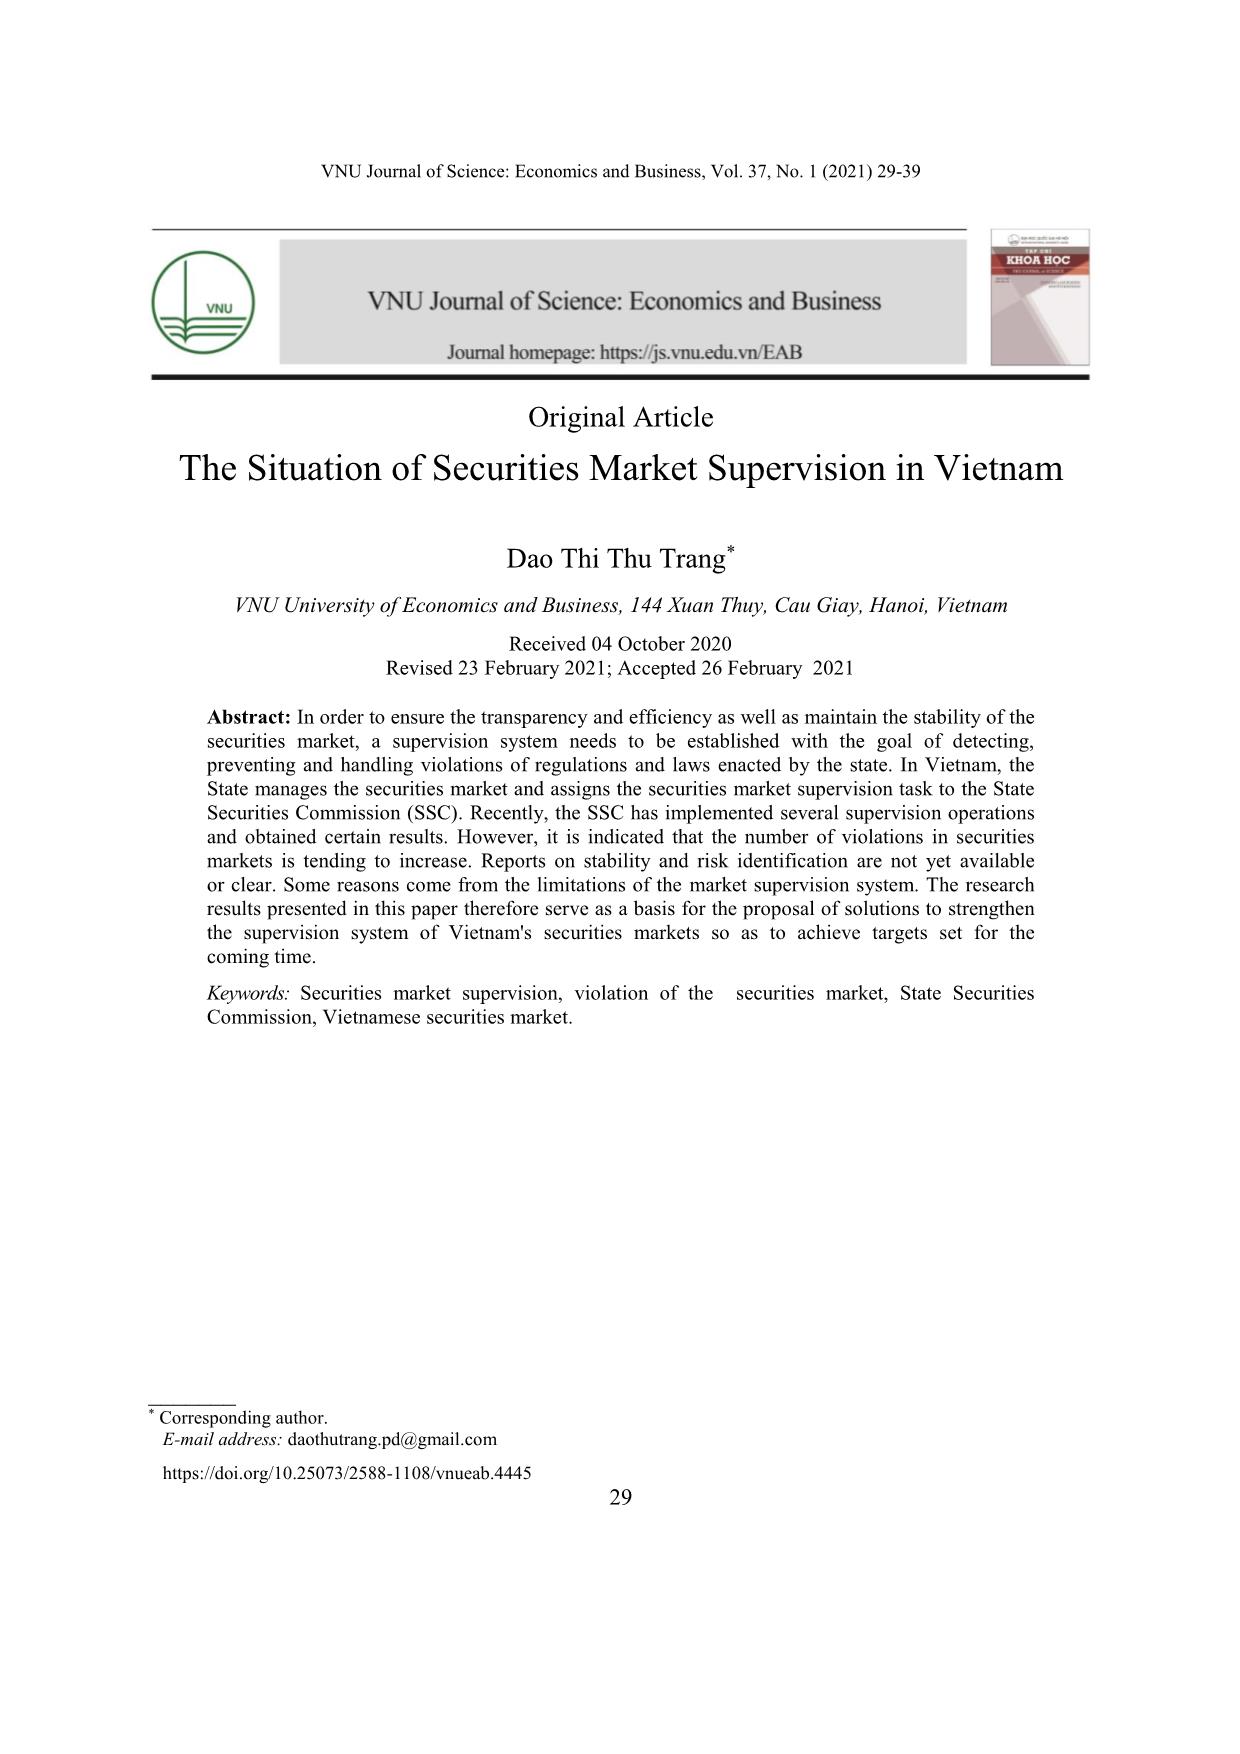 The Situation of Securities Market Supervision in Vietnam trang 1